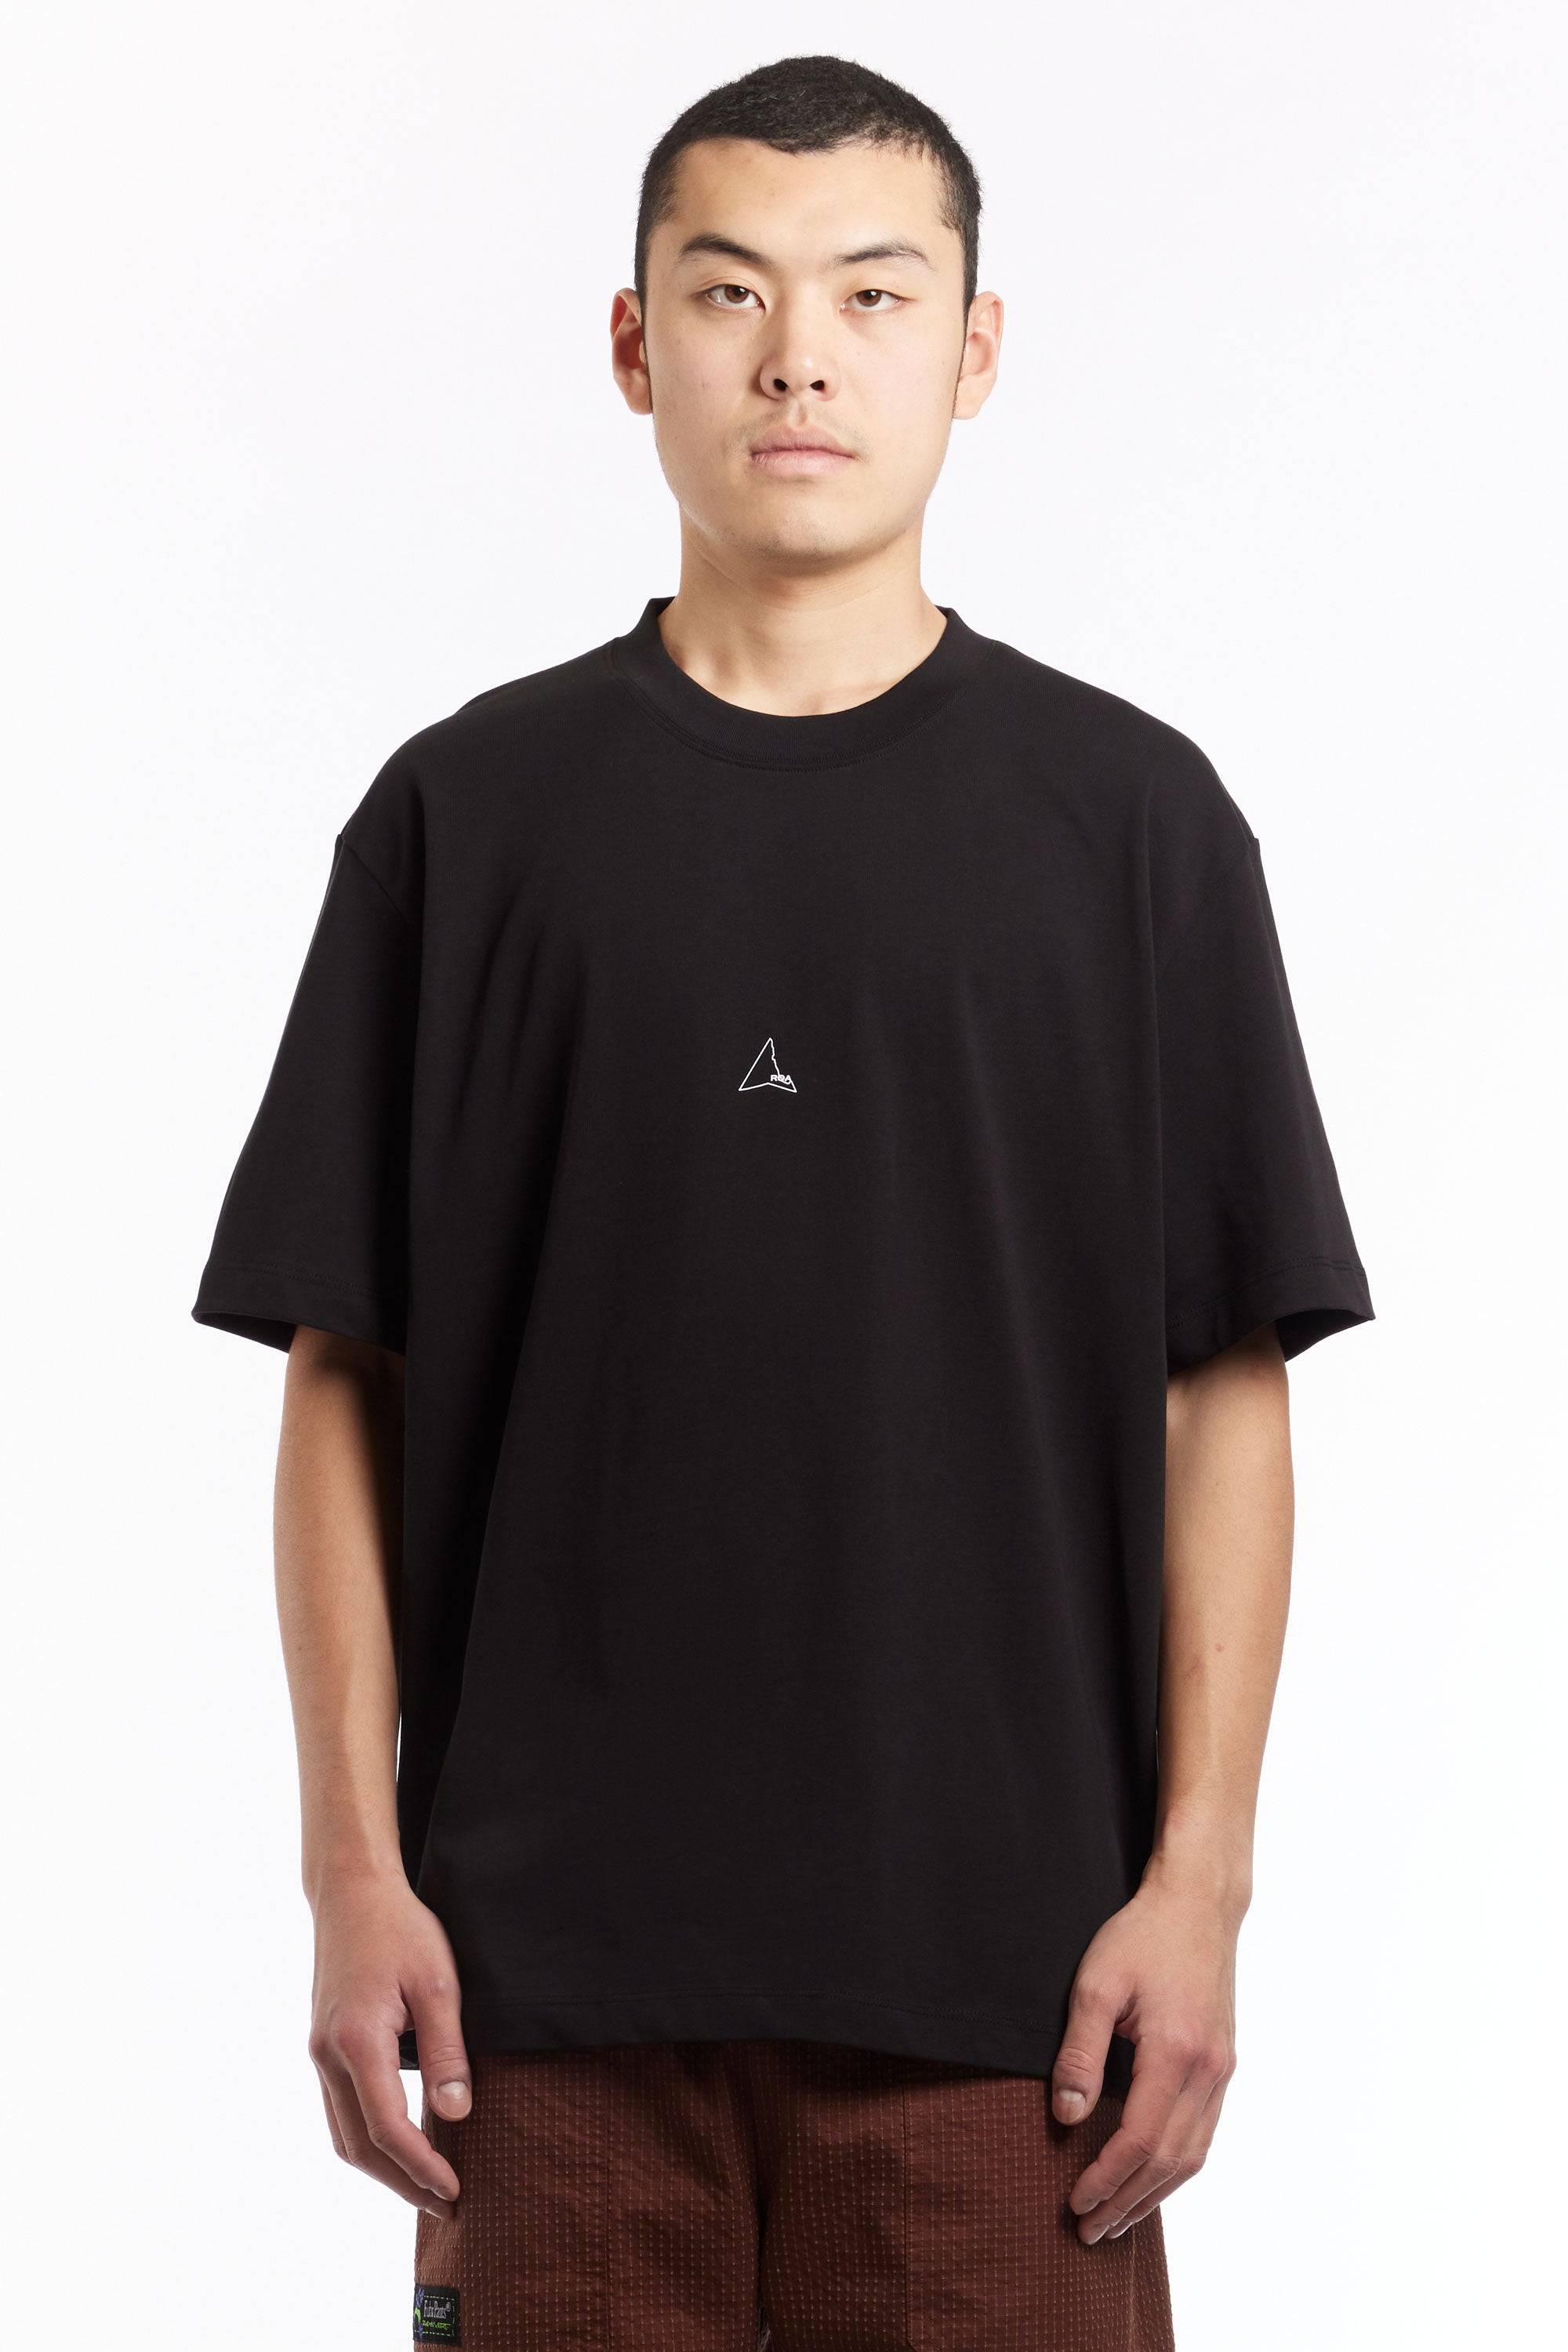 The ROA - LOGO TEE  available online with global shipping, and in PAM Stores Melbourne and Sydney.